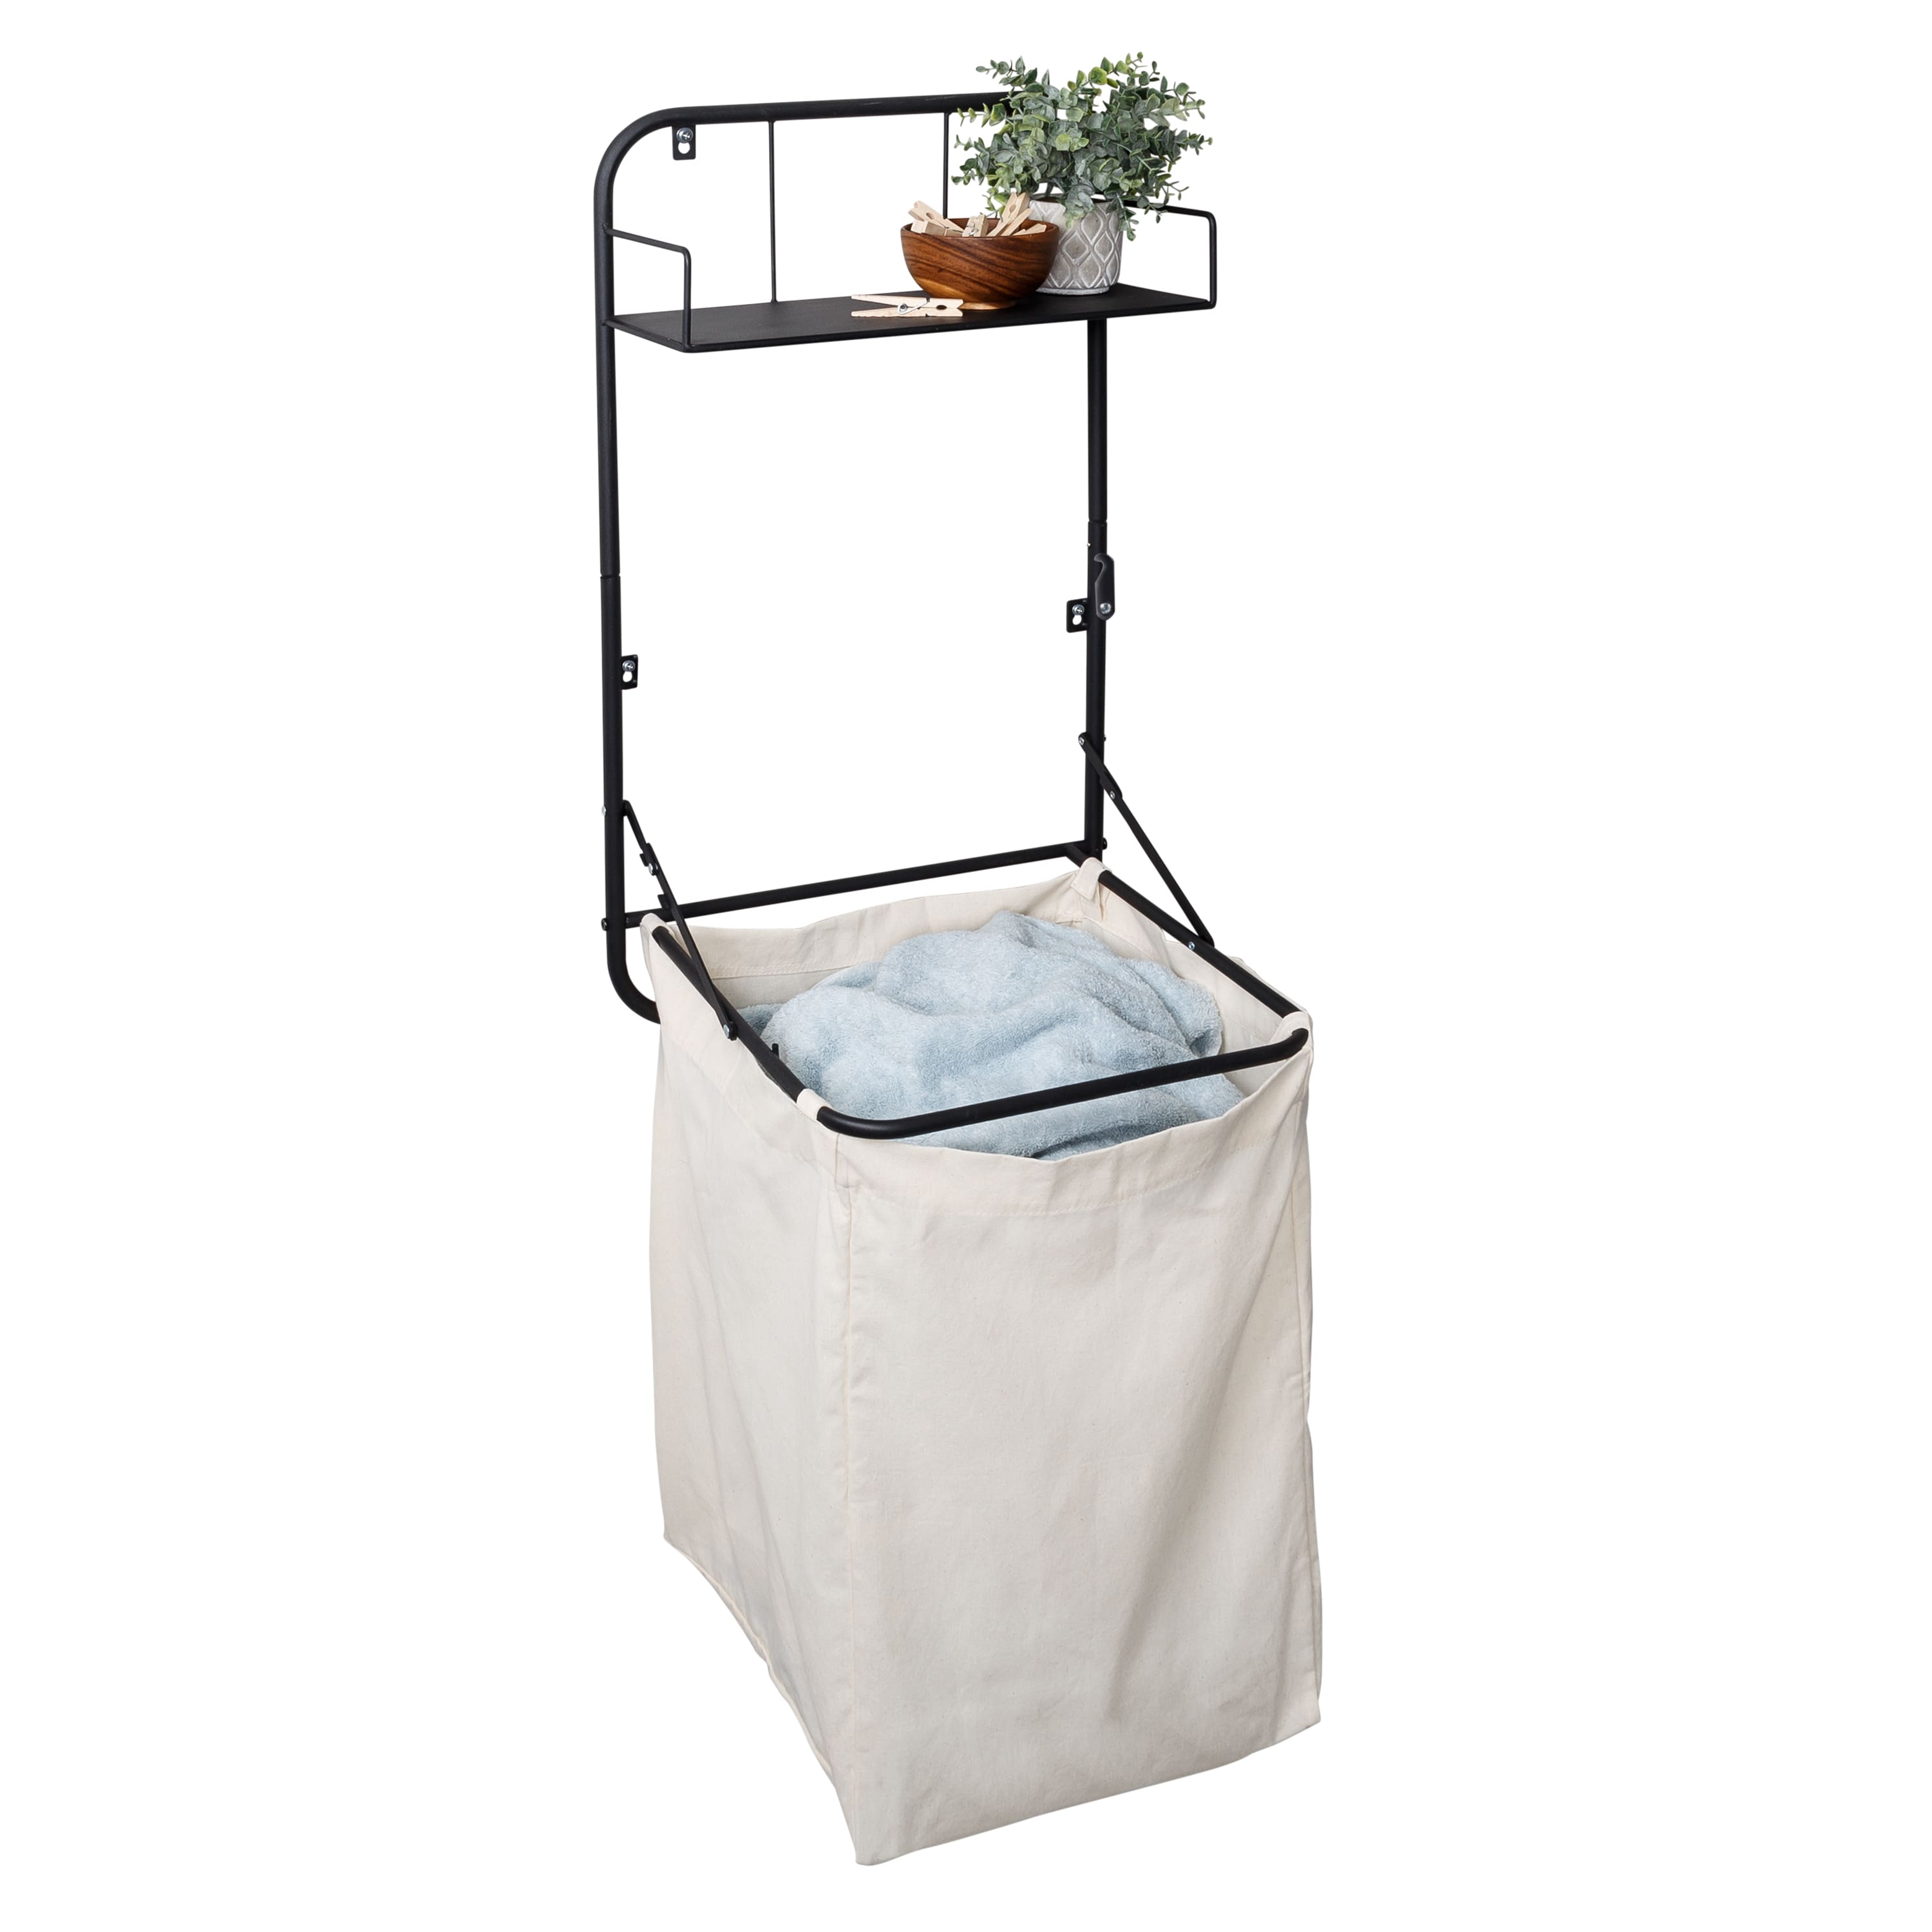 Honey Can Do Black Collapsible Wall-Mounted Clothes Hamper with Canvas Bag and Laundry Shelf